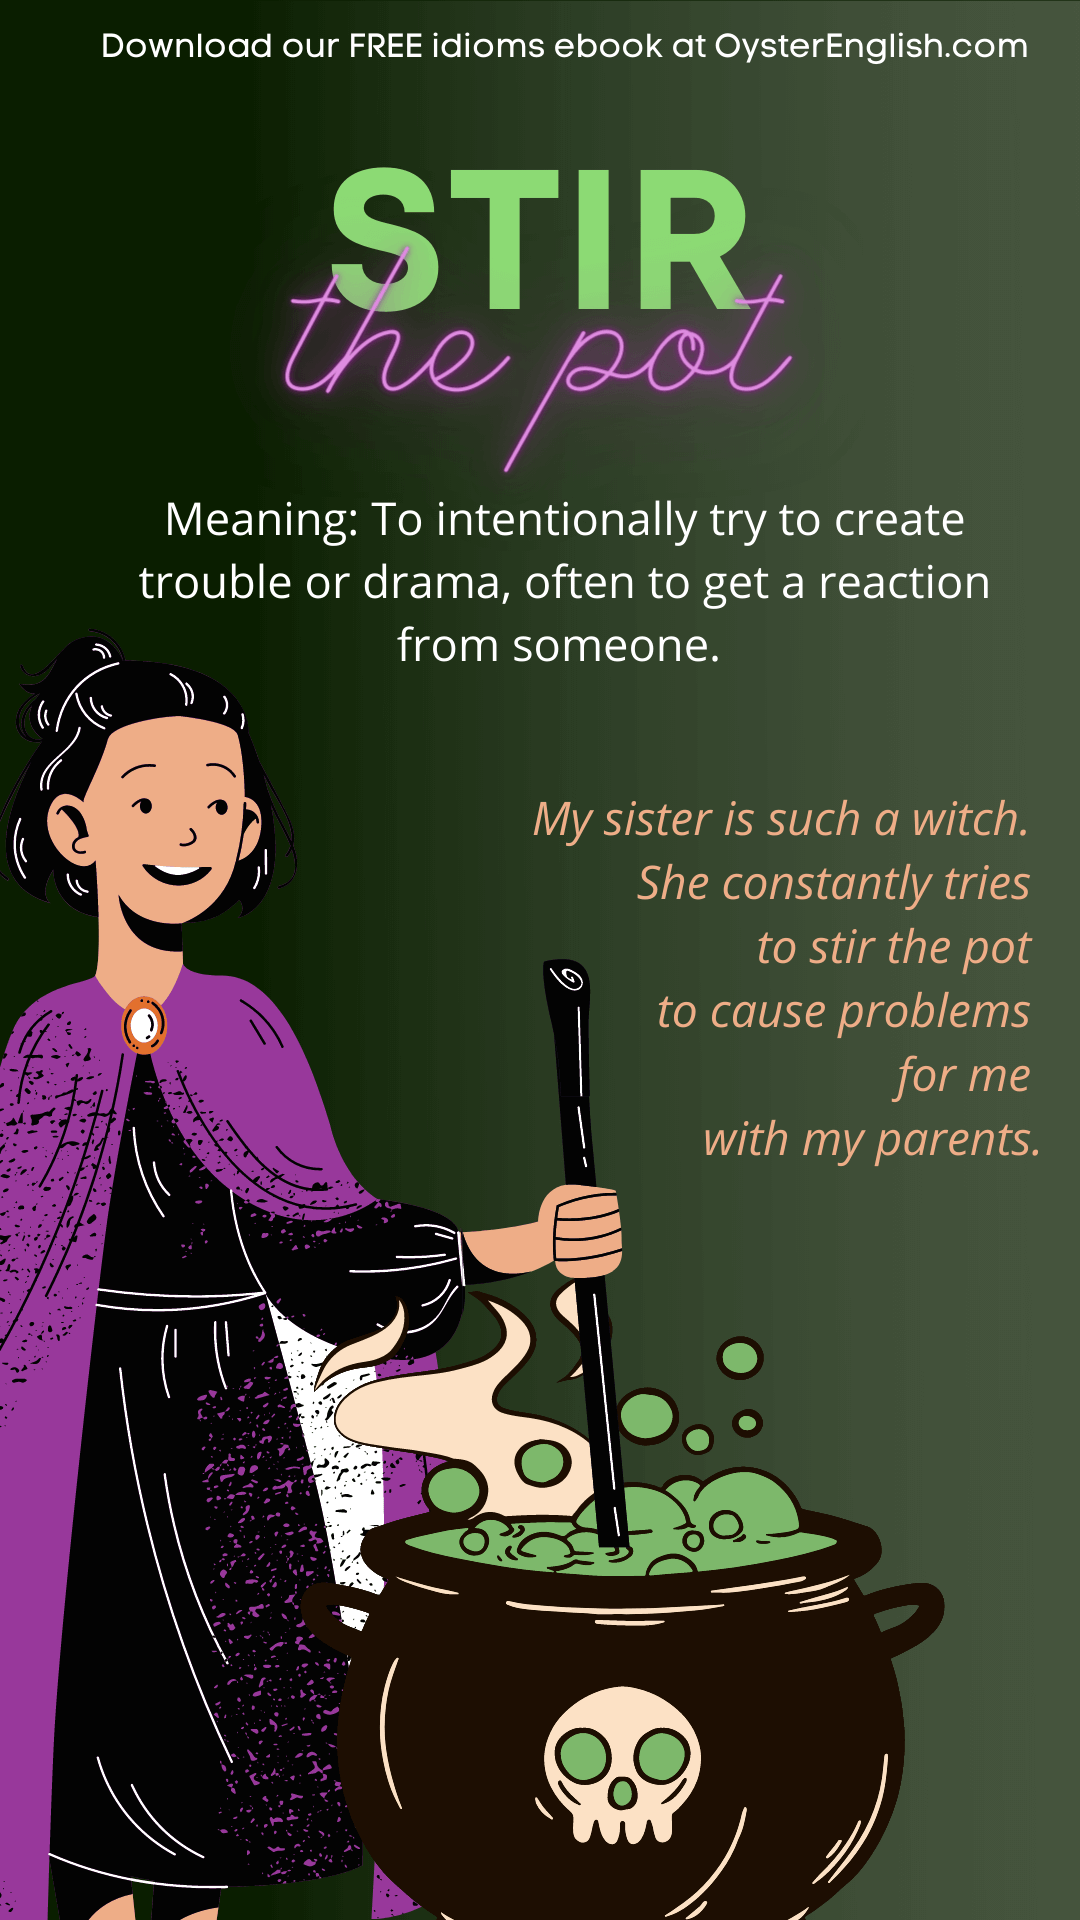 An image of a girl in a witch's outfit stirring liquid in a cauldron. Caption: "My sister is such a witch. She constantly tries to stir the pot to cause problems for me with my parents."